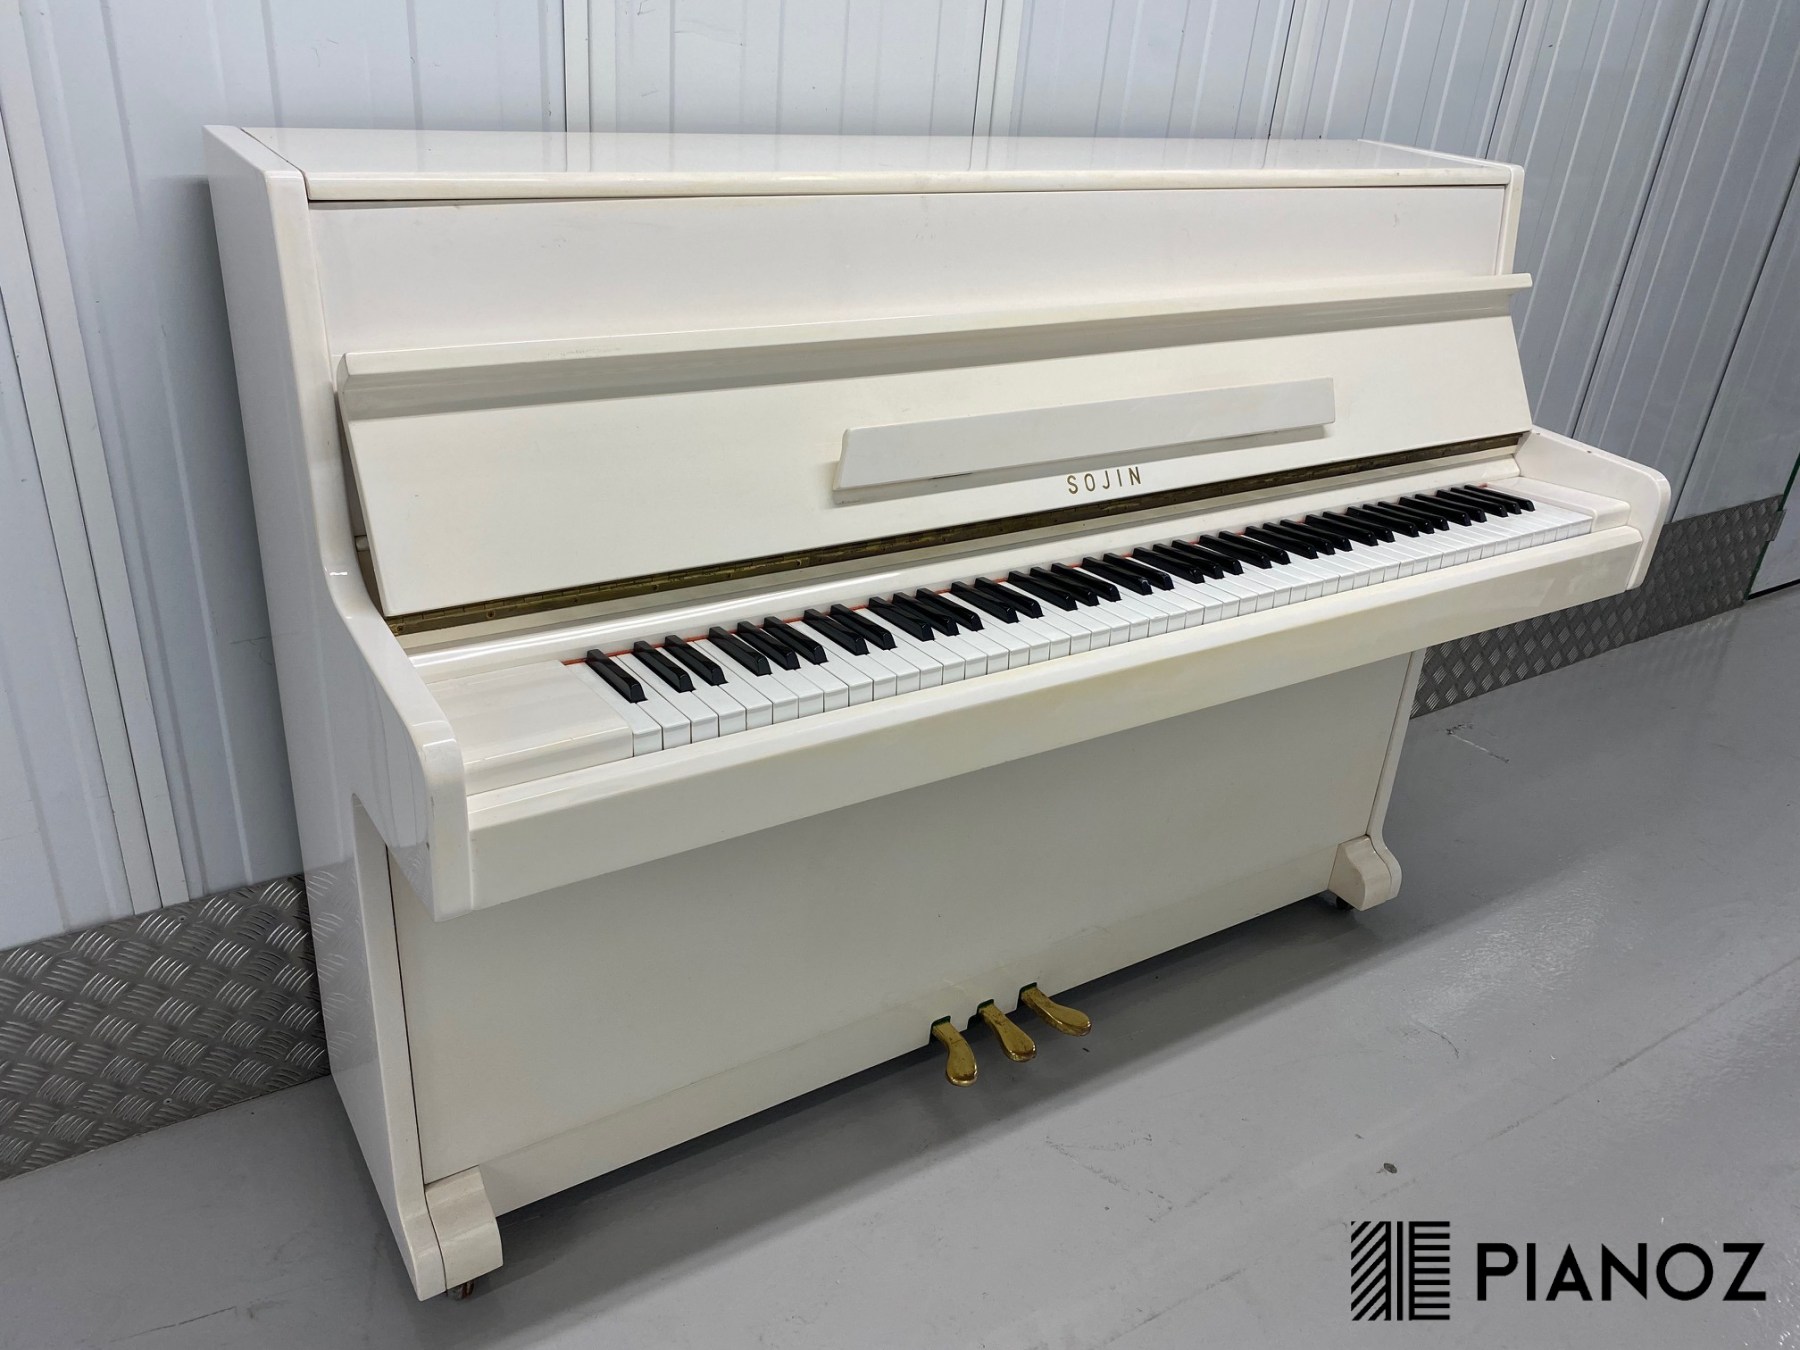 get annoyed convertible Bungalow Sojin White High Gloss Upright Piano for sale UK | P I A N O Z - The  Ultimate Online Piano Showroom - UK Piano Shop - Black Baby Grands